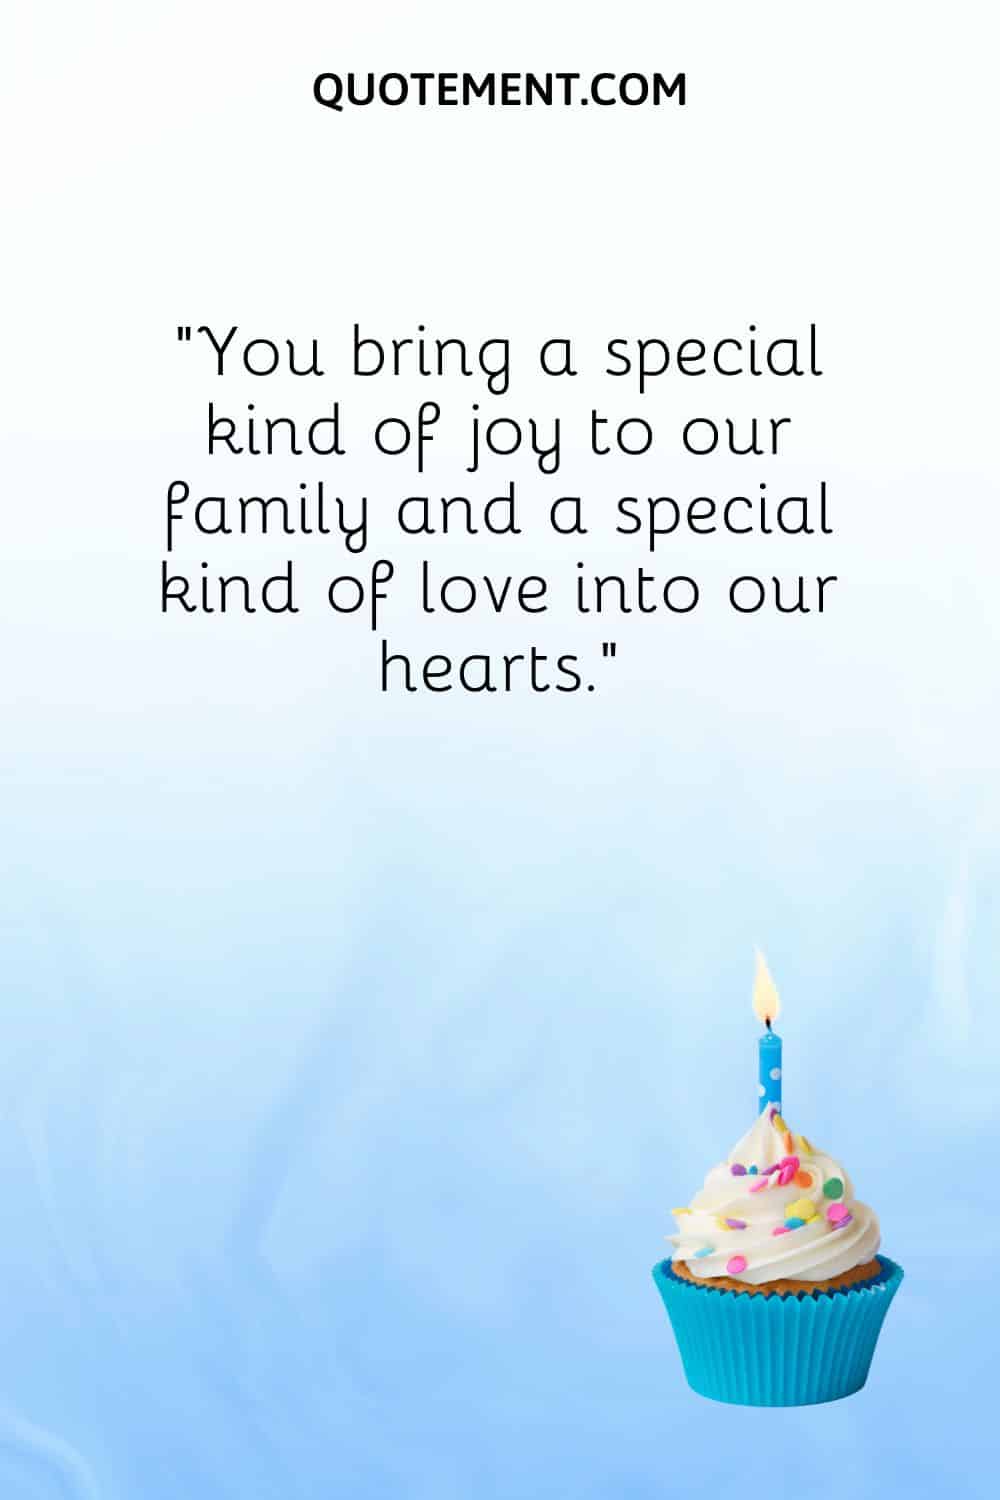 “You bring a special kind of joy to our family and a special kind of love into our hearts.”